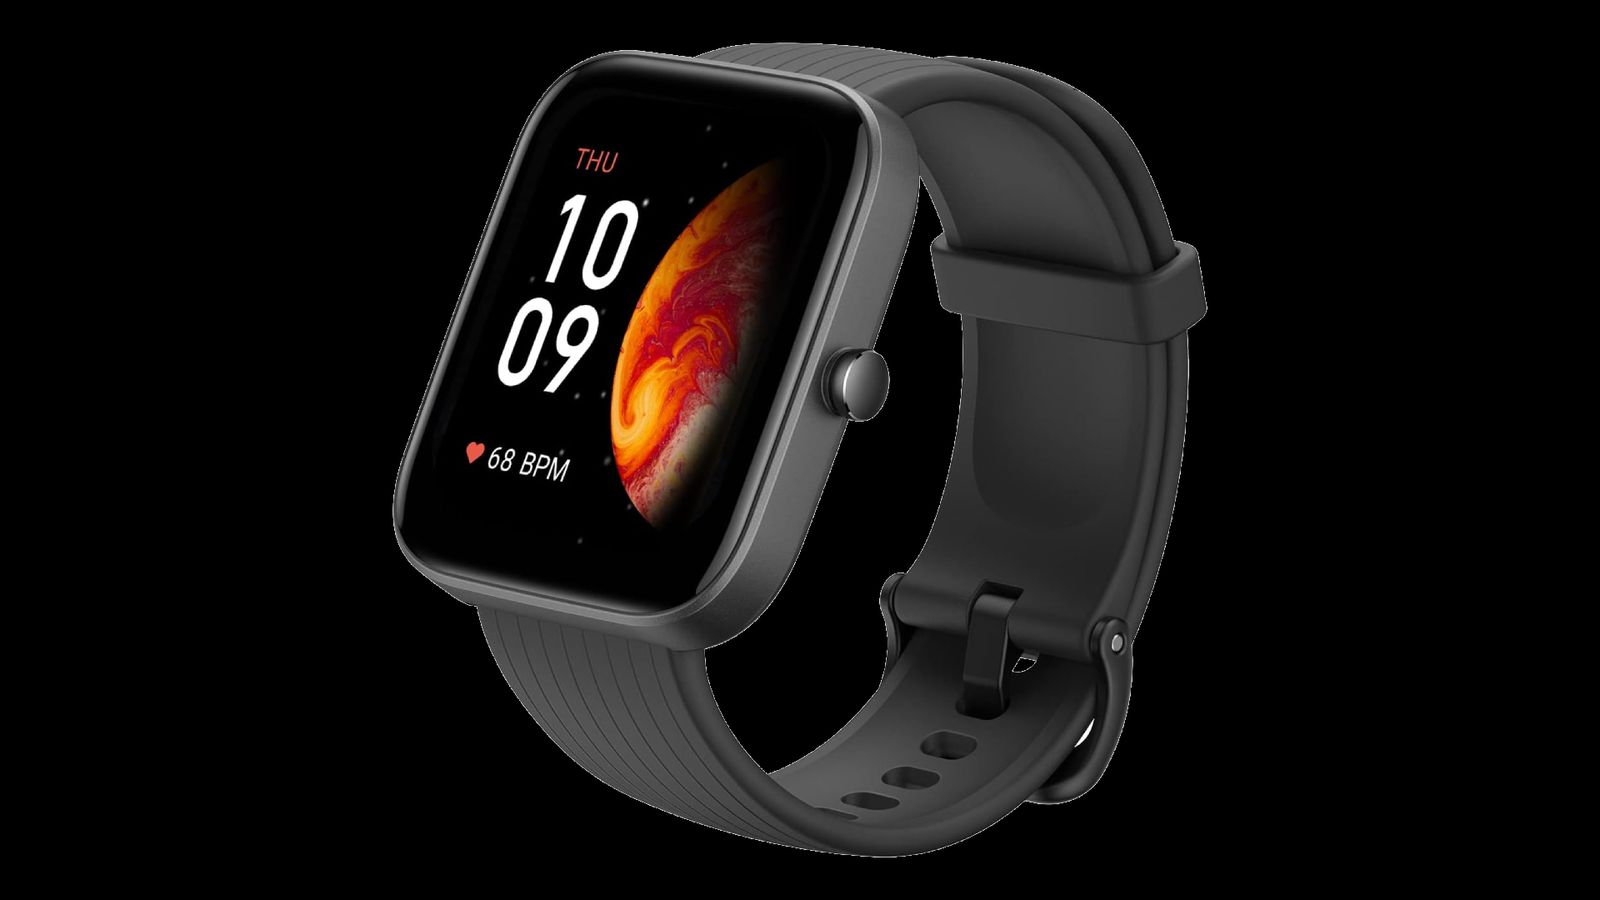 Amazfit Bip 3 Pro product image of a black smartwatch with the time 10:09 in white next to an orange and red planet on the display.